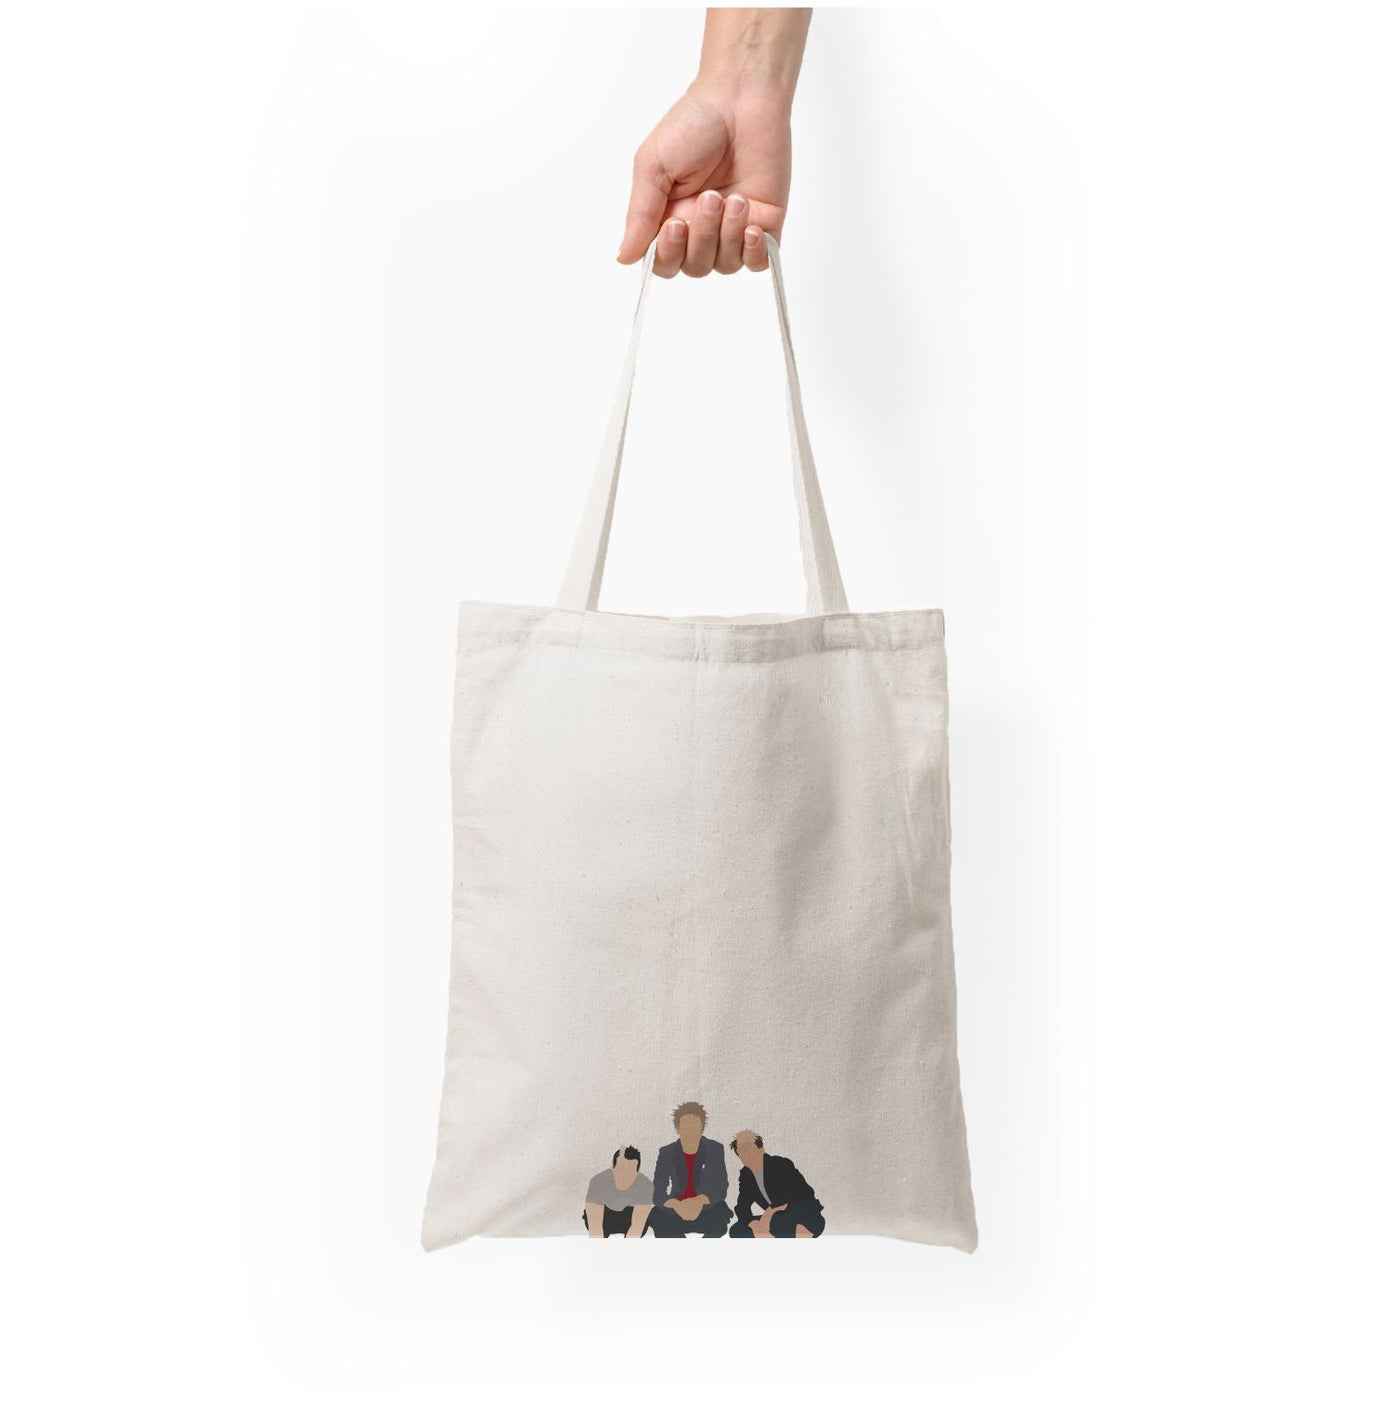 The Boys - Busted Tote Bag